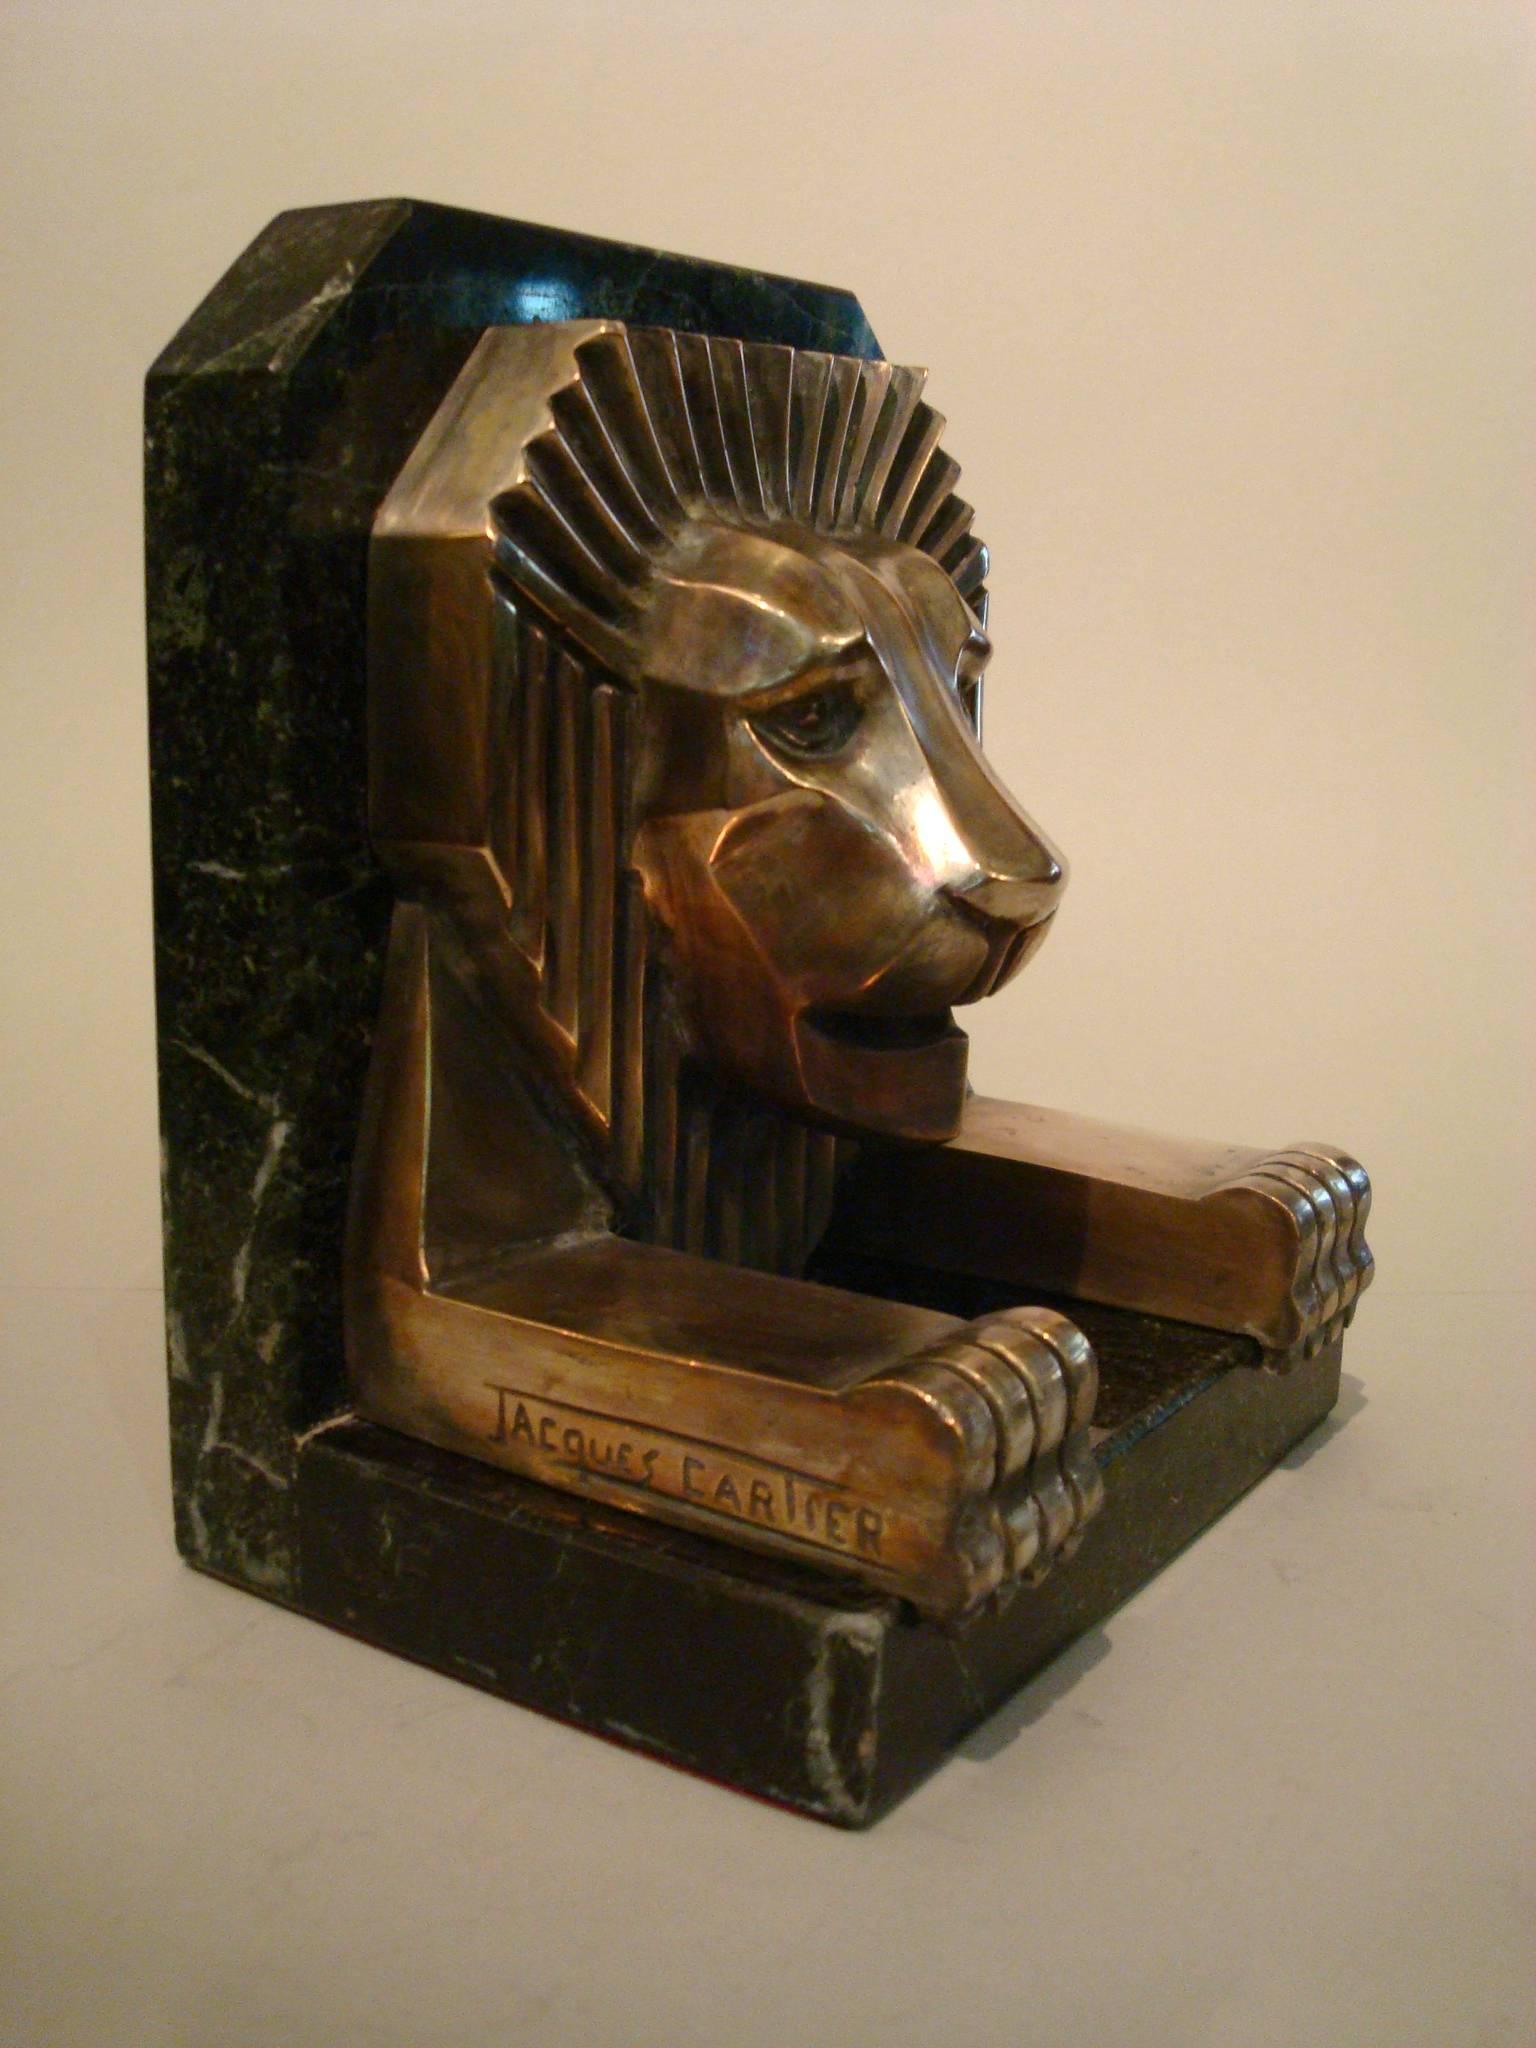 Fantastic Art Deco bronze lion bookends. Silvered plated. Dark green marble. Signed Jacques Cartier, France, 1925.